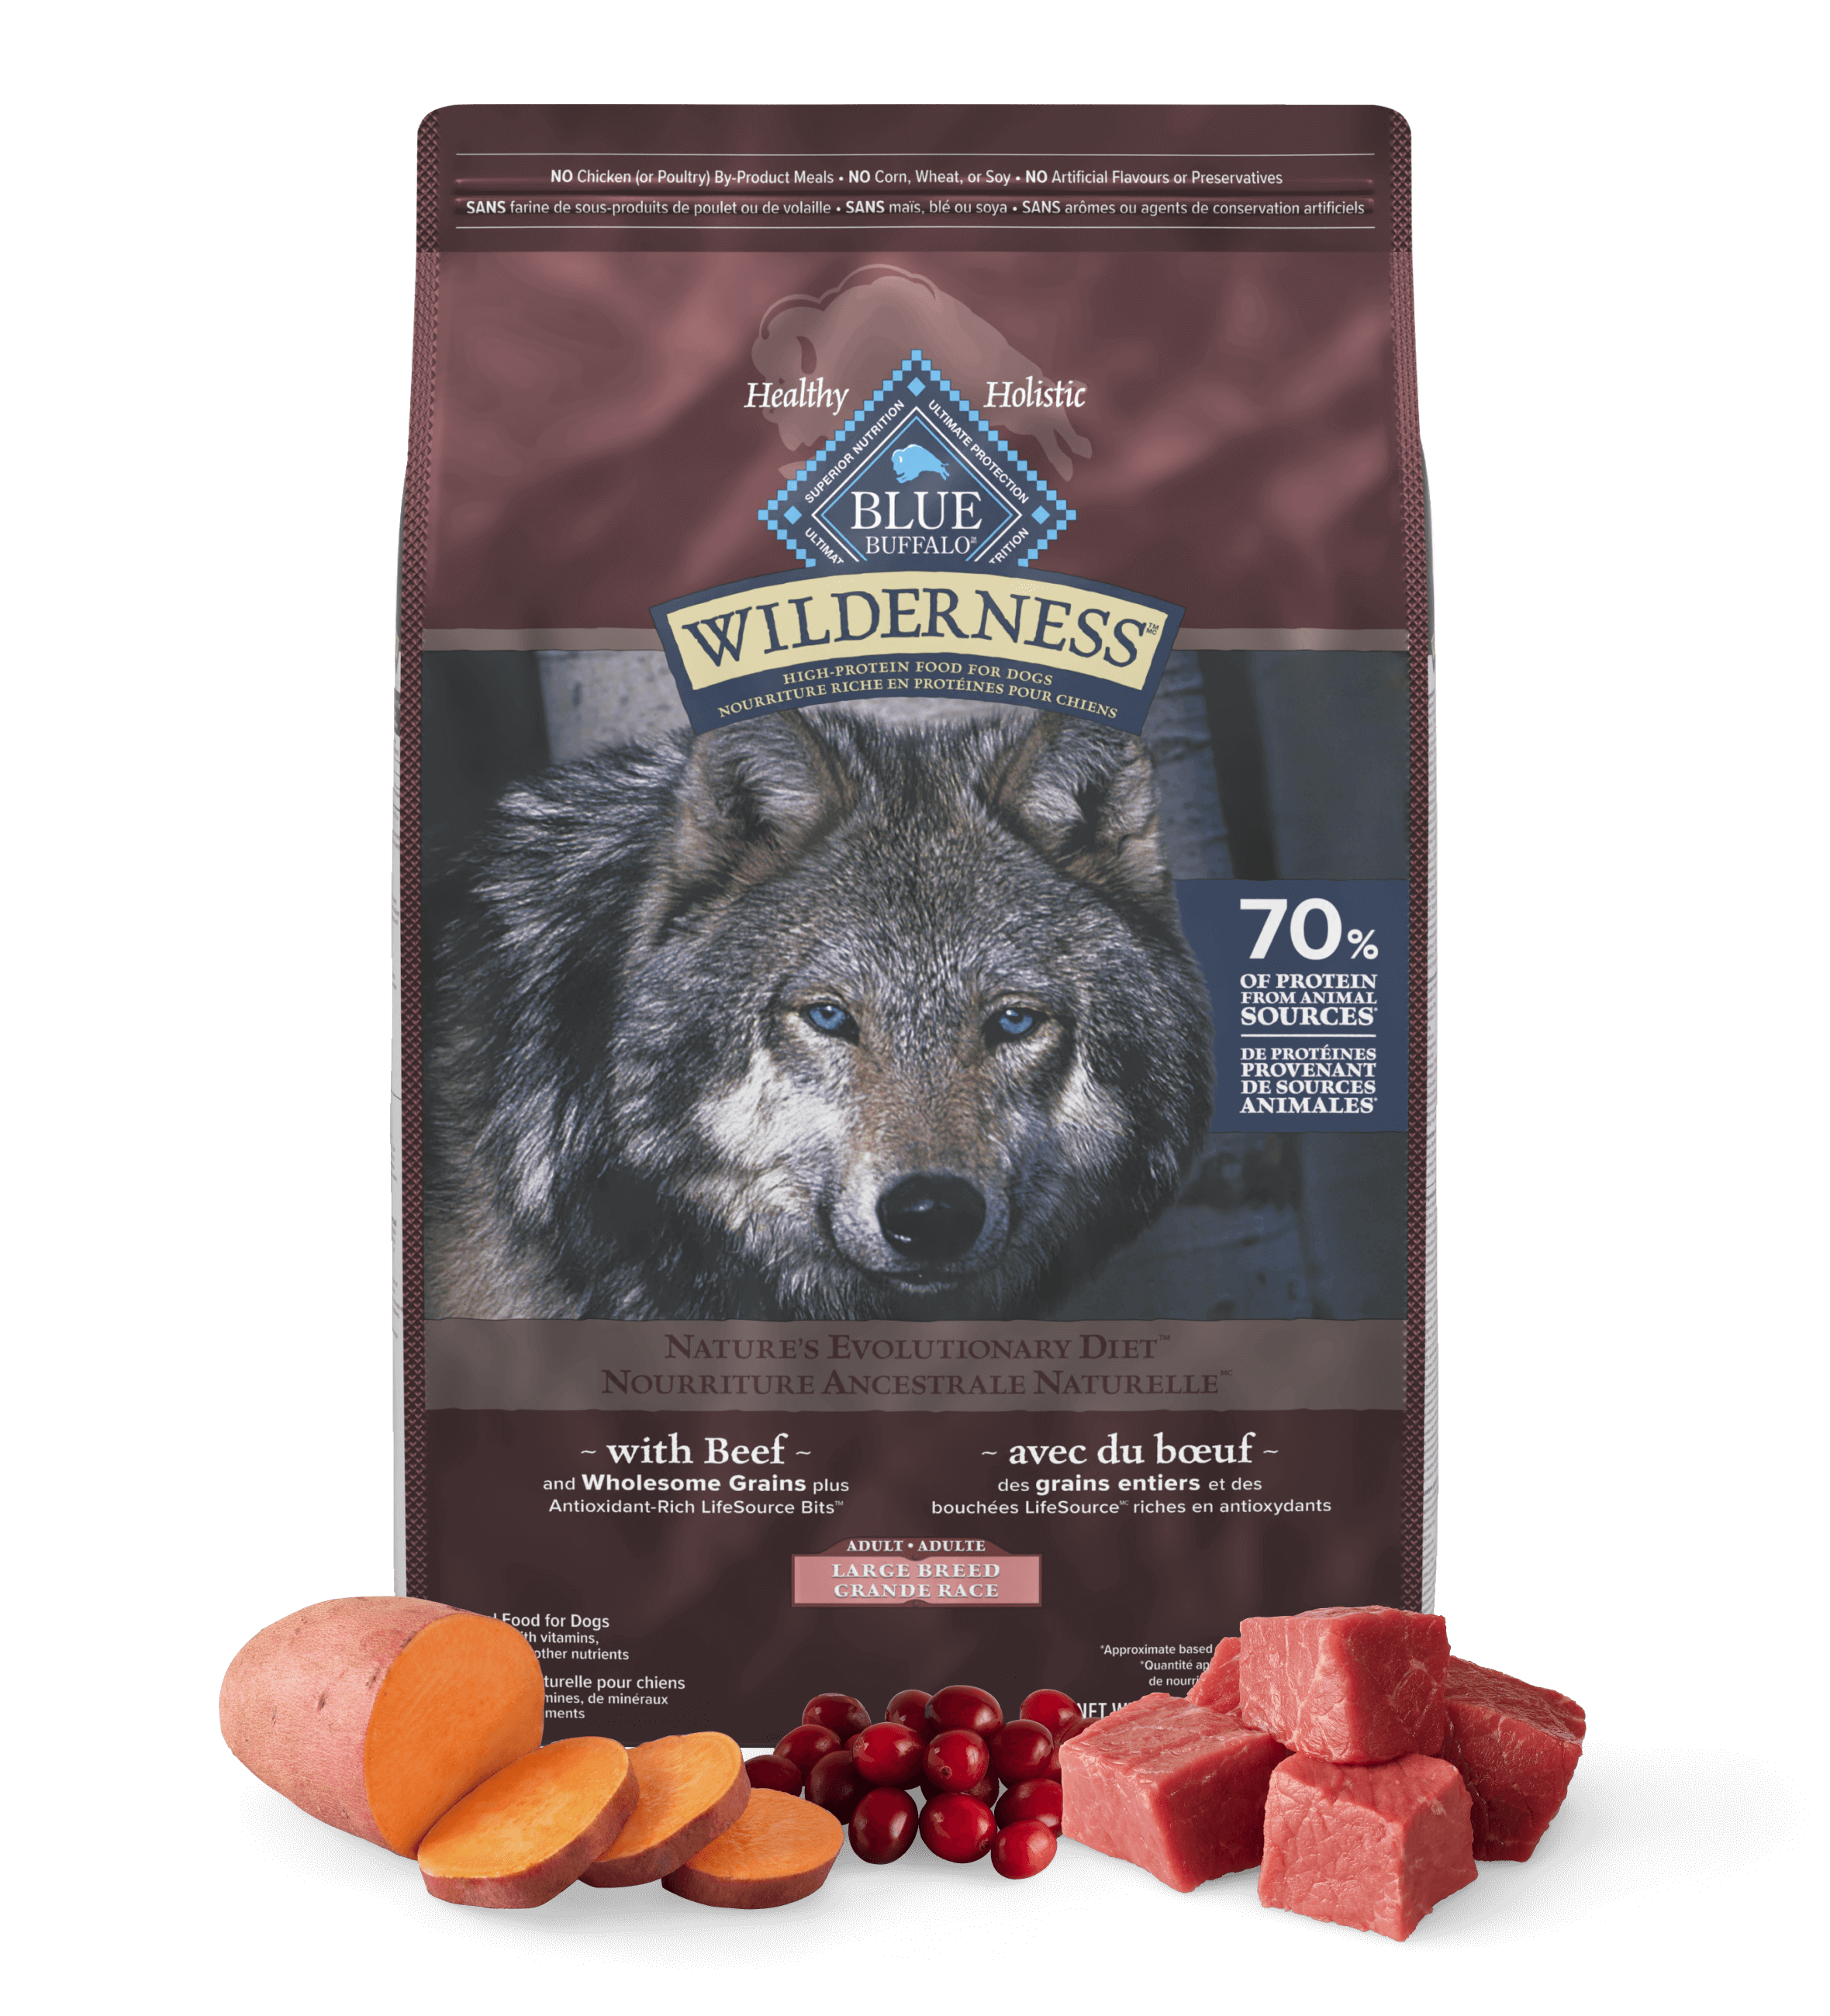 Wilderness Large Breed Adult Beef with Wholesome Grains Recipe Bag of Dog Food